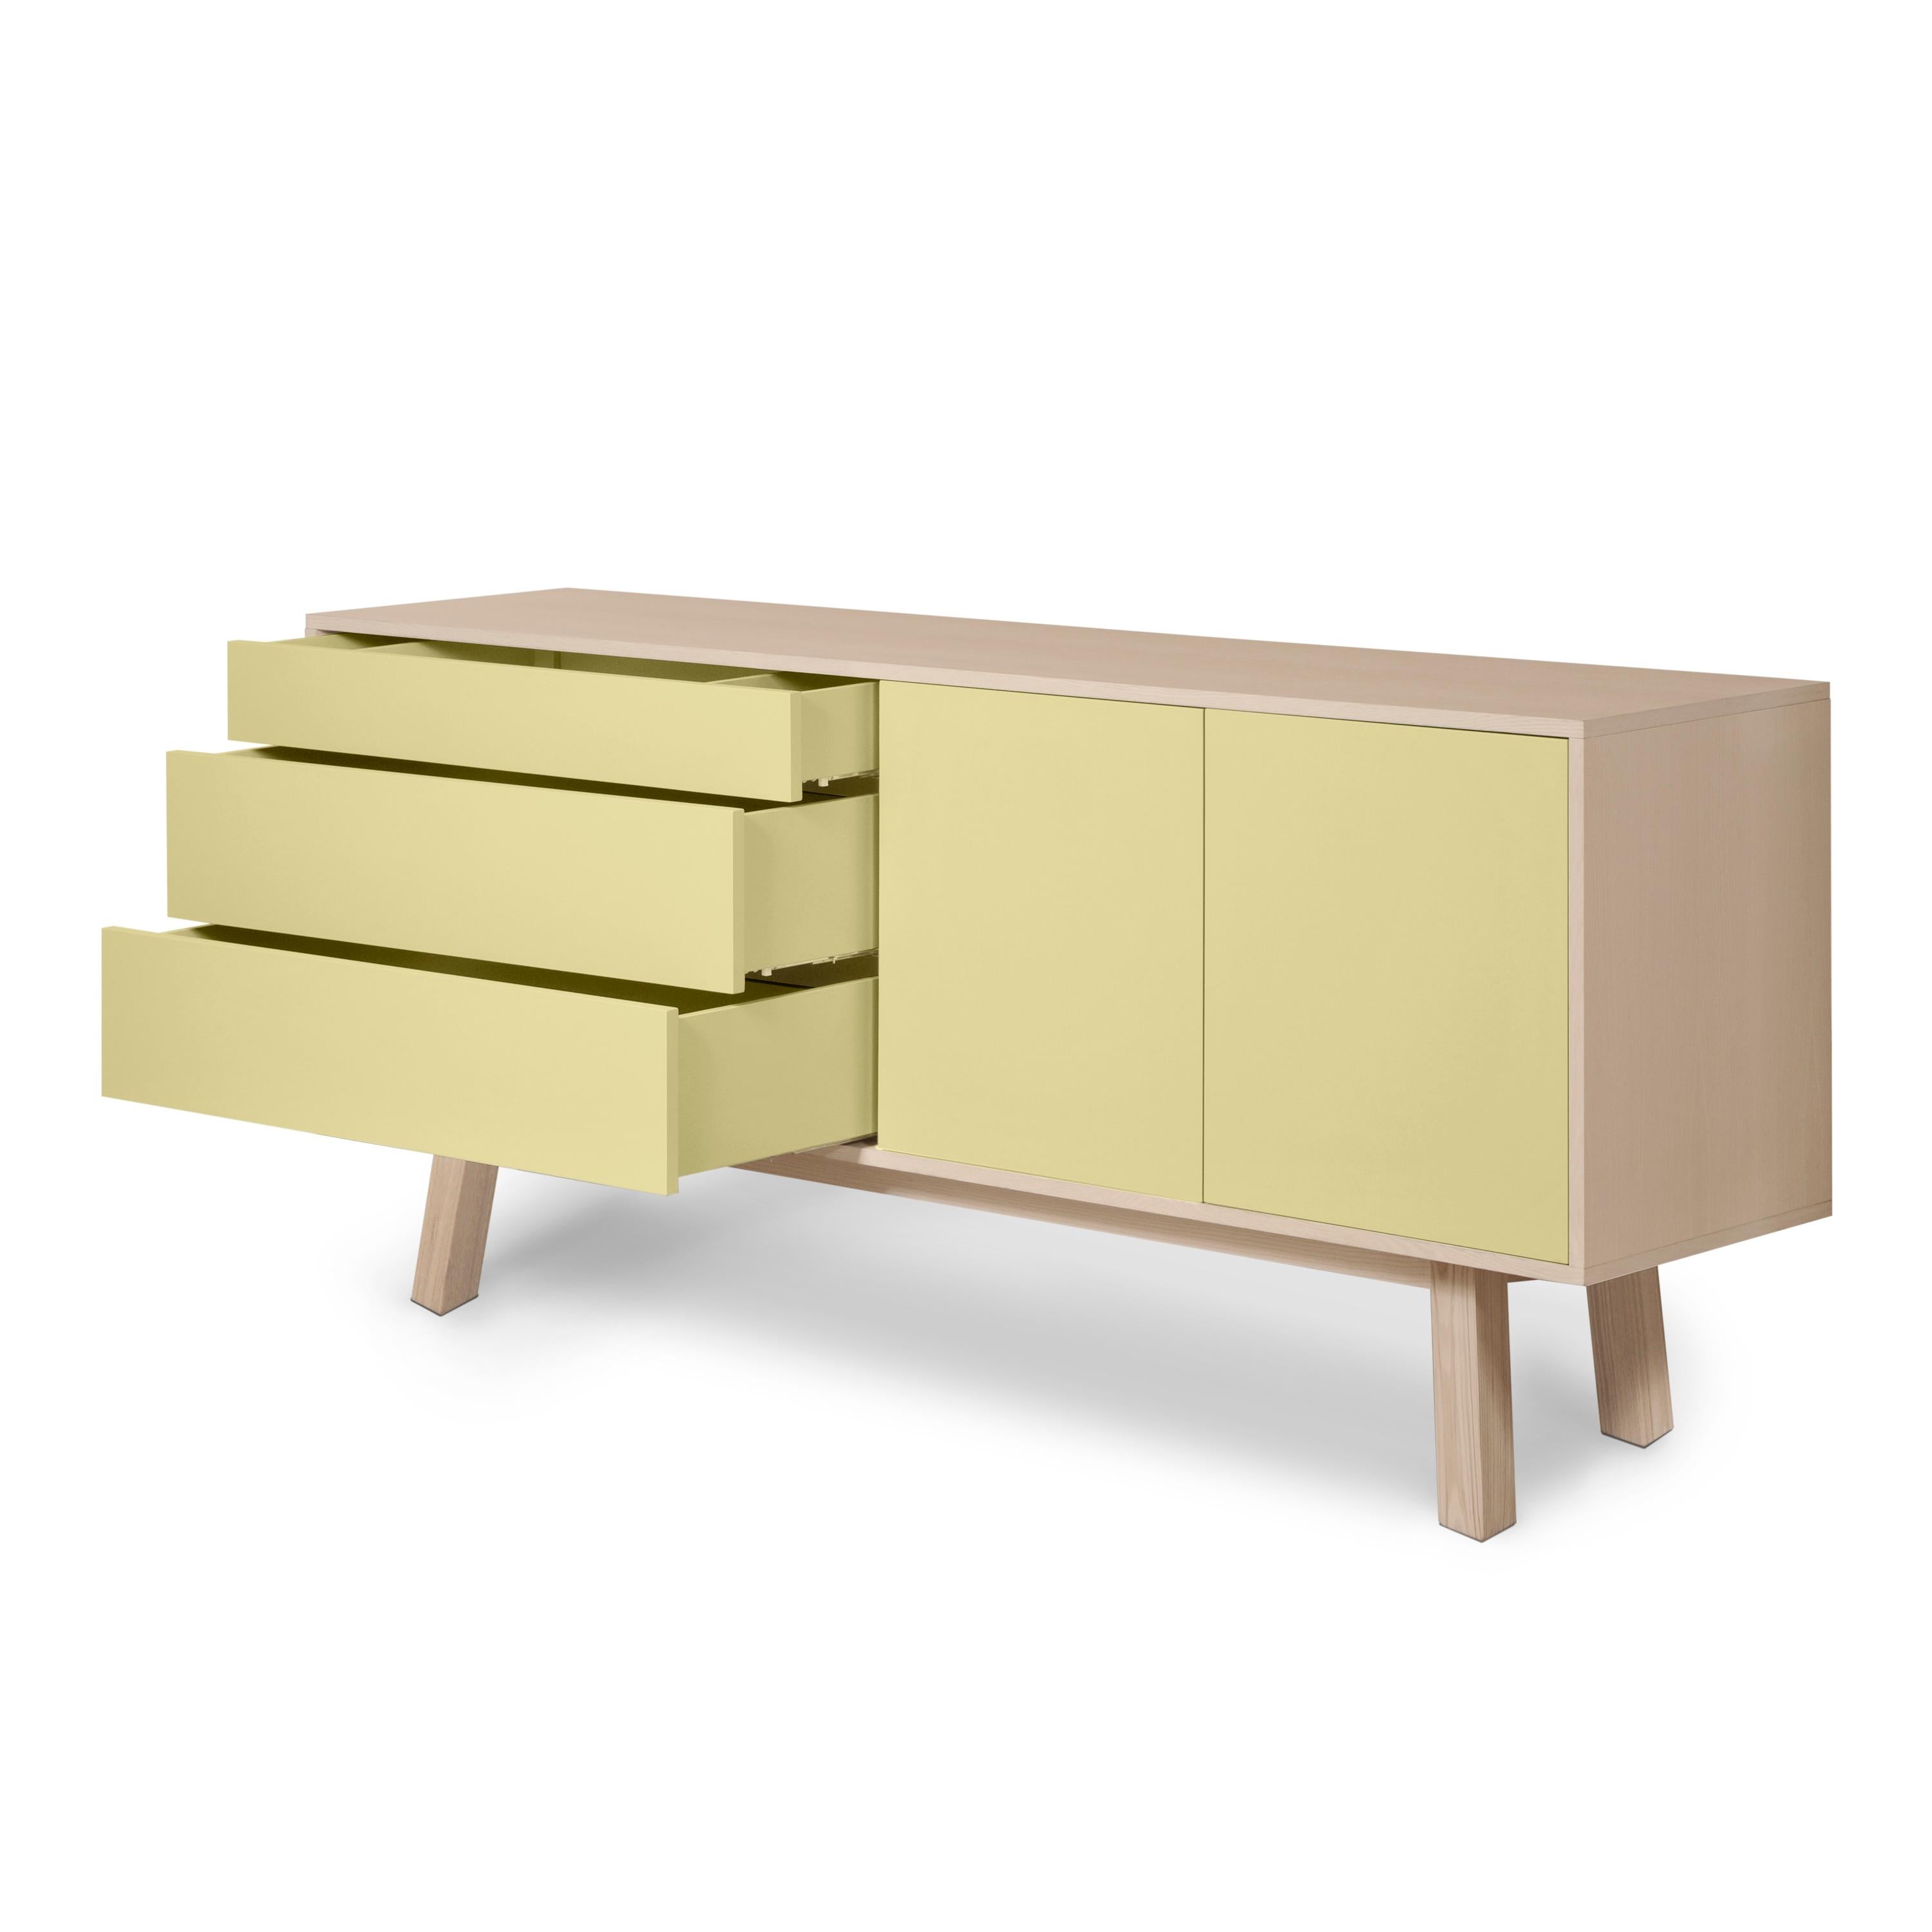 Scandinavian Modern Yellow Higher Sideboard with doors and drawers designed in Paris by E. Gizard For Sale